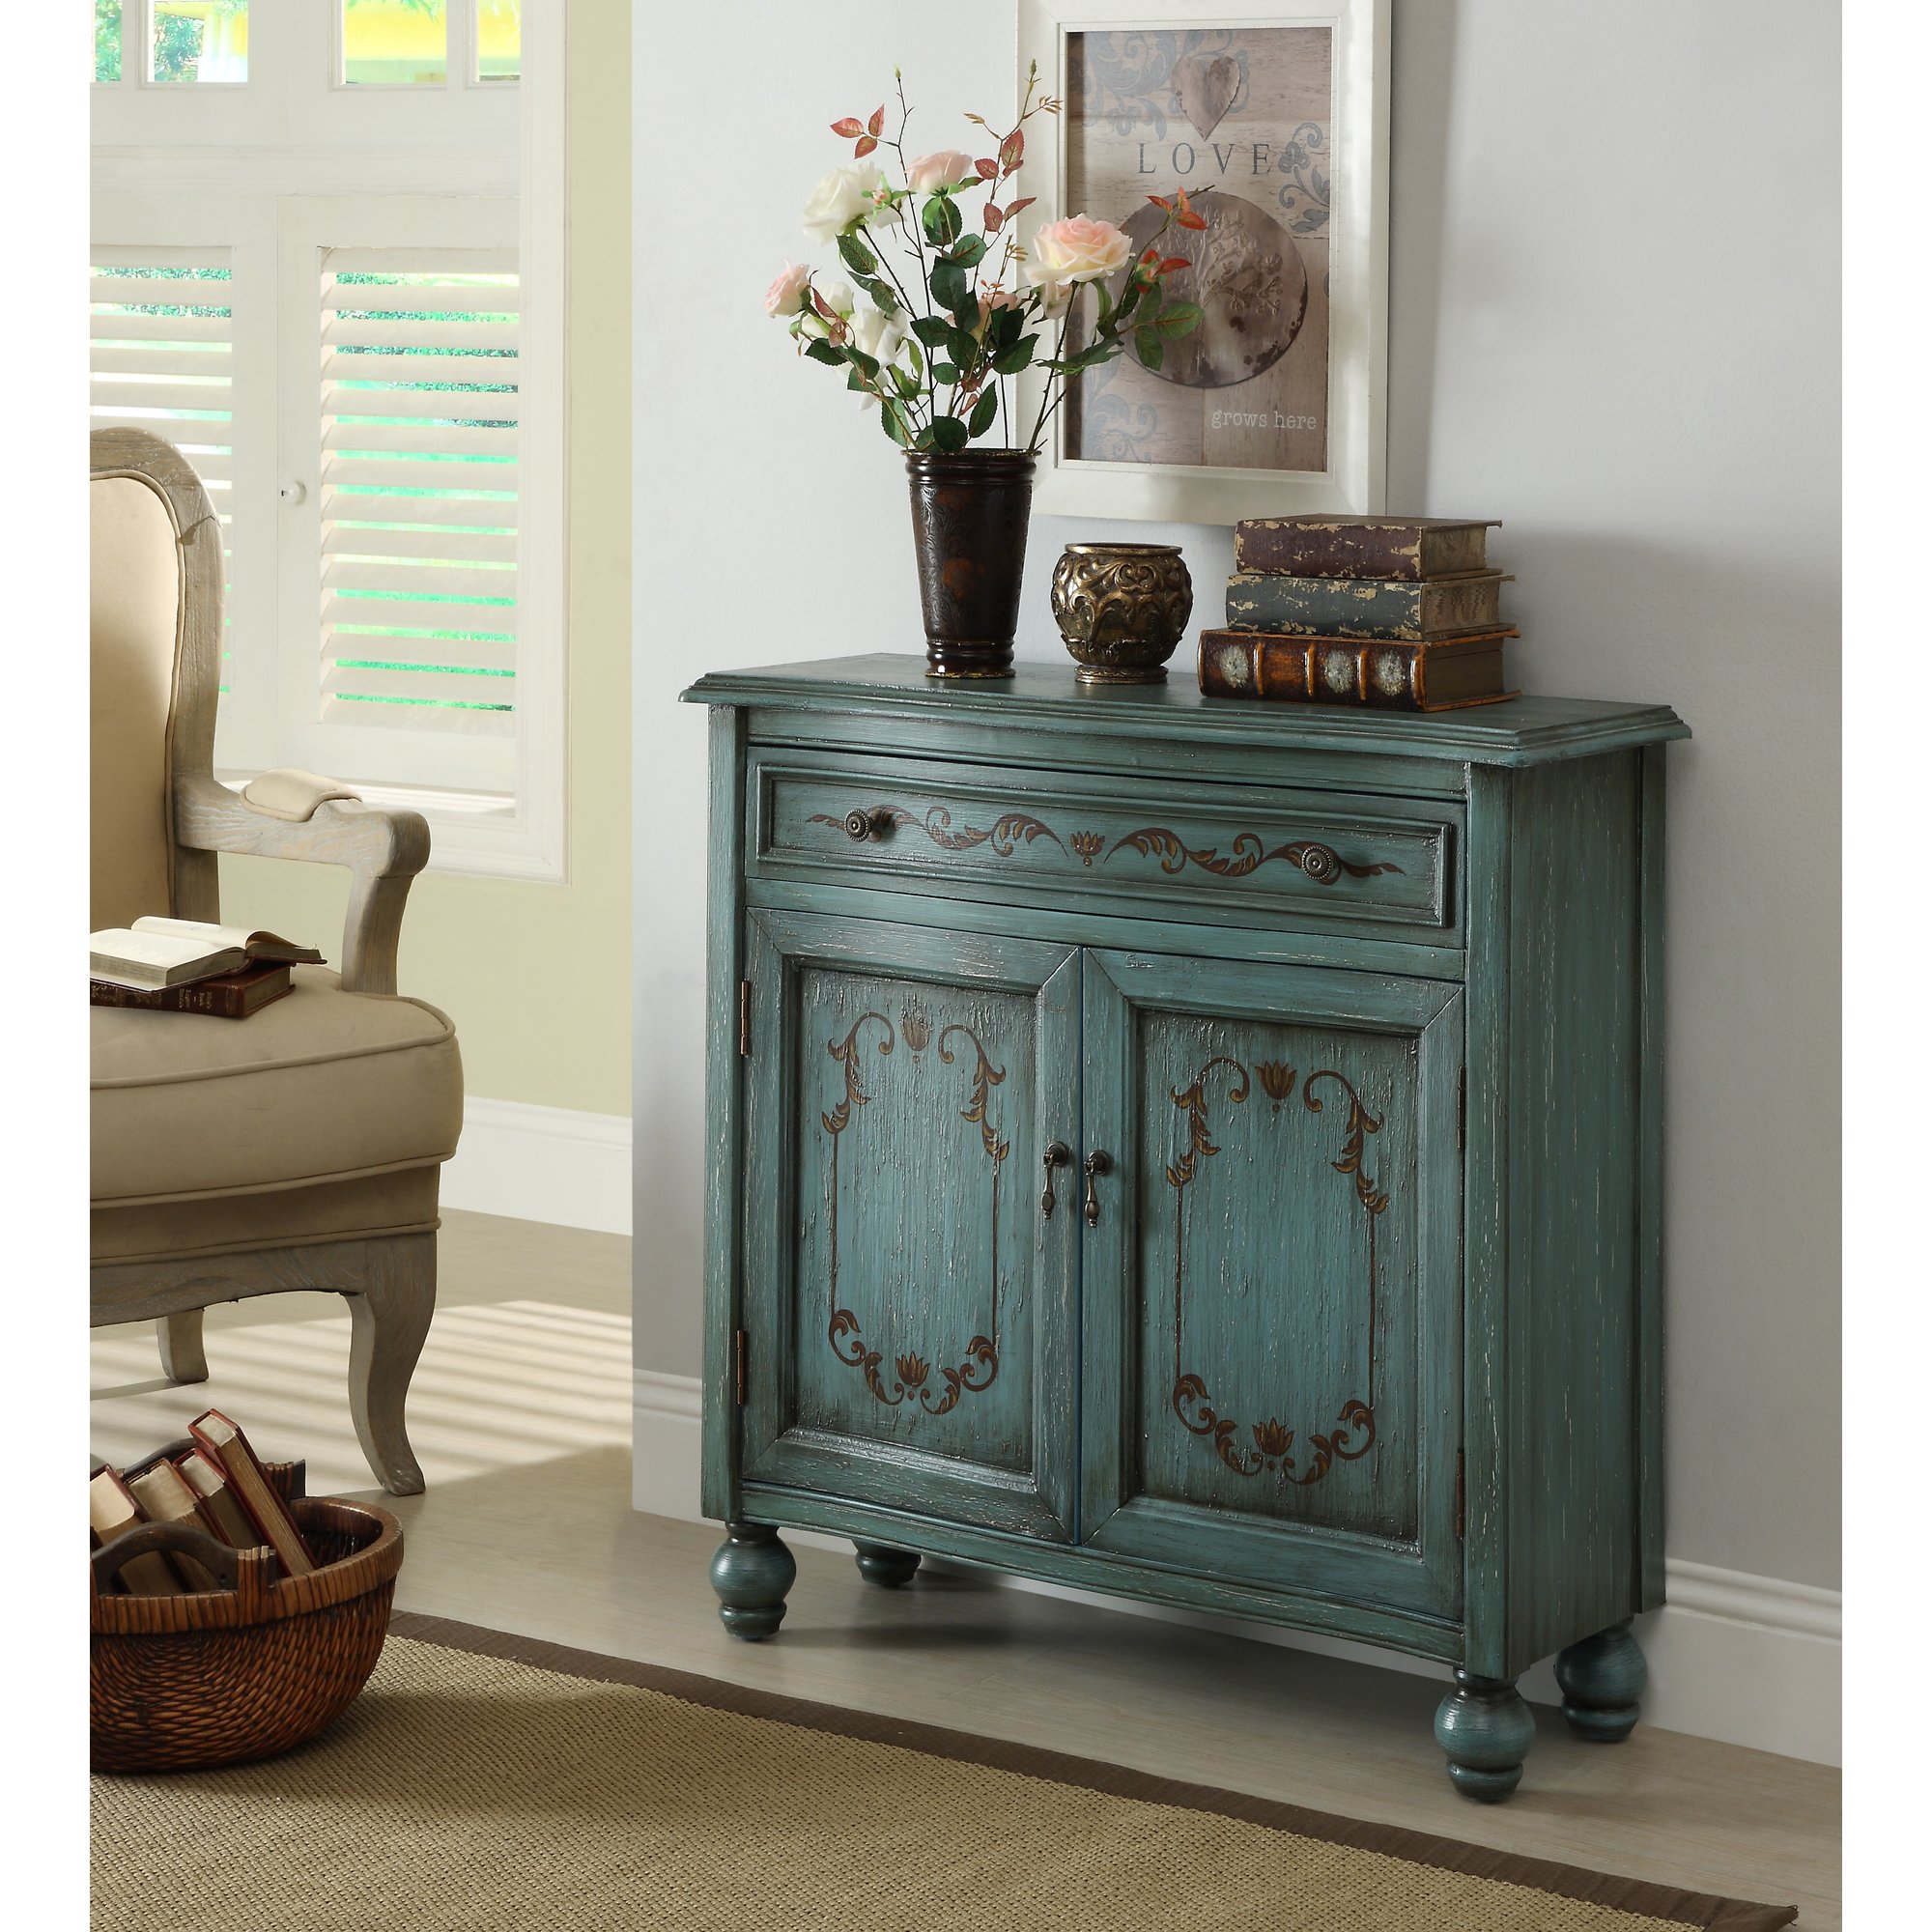 teal accent cabinet side table chest doors shelves vintage lotta door with details about distressed entry decor pottery barn trestle bark thins target turquoise home accents for